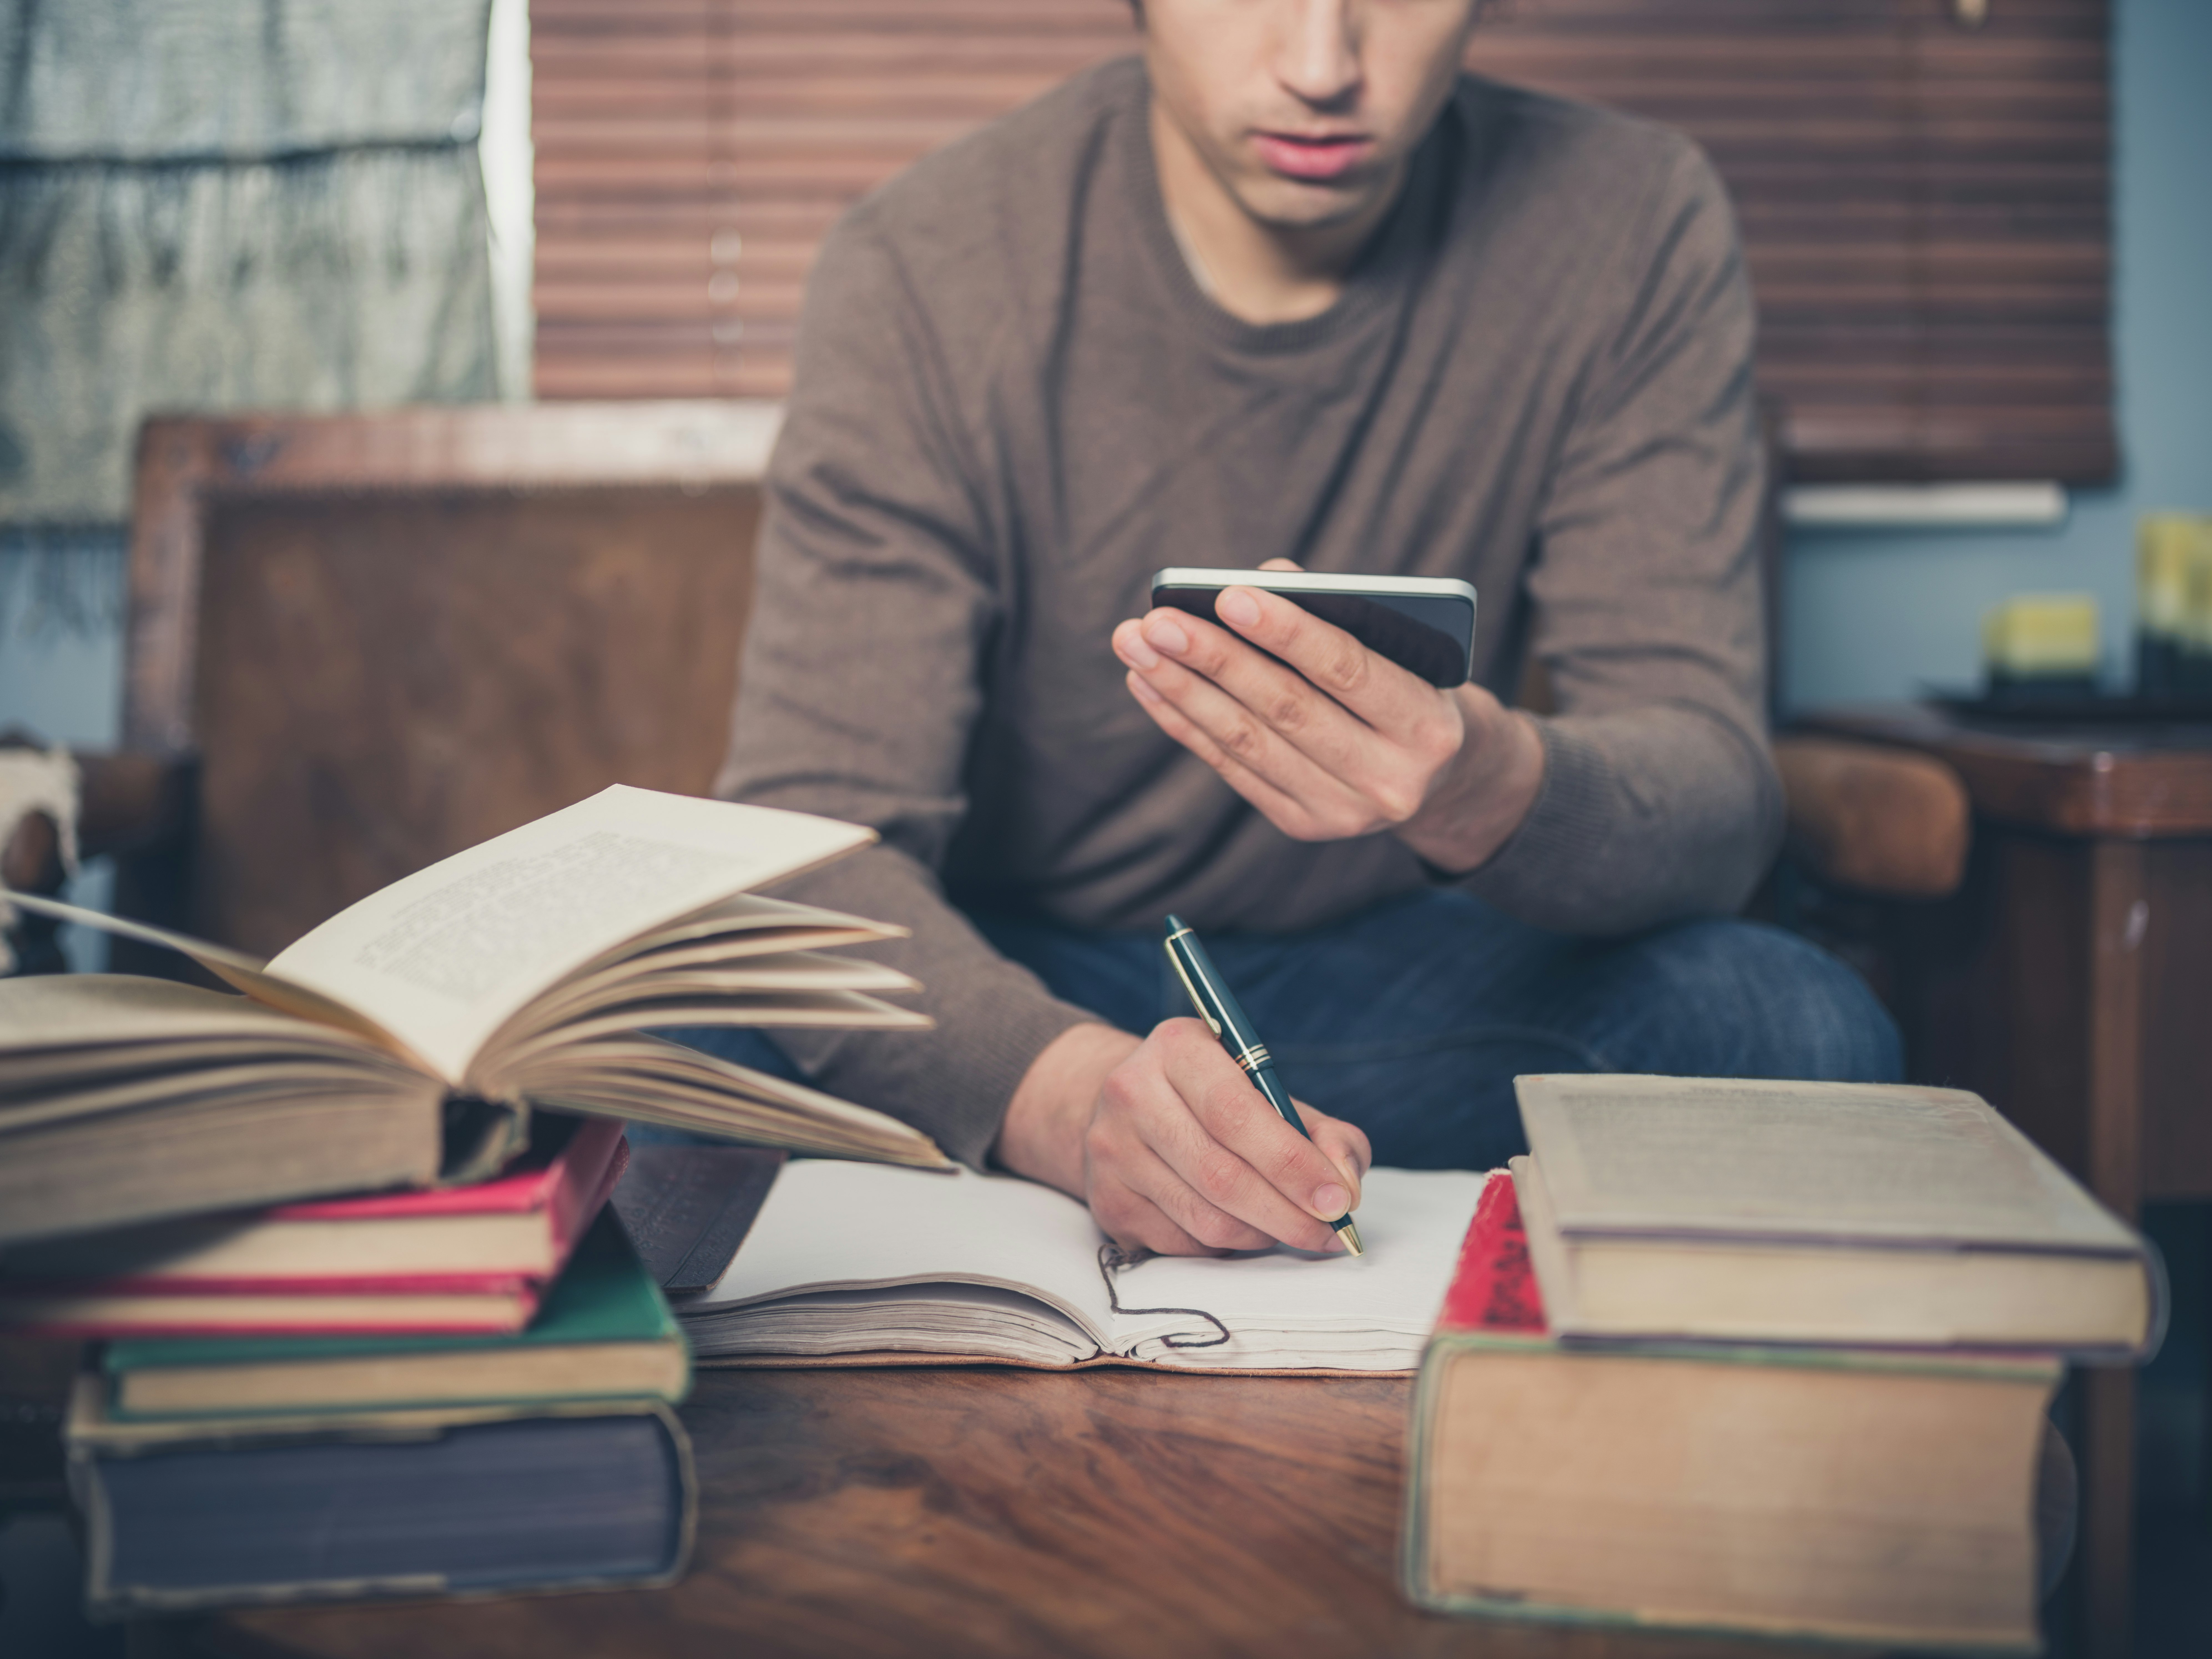 A young man is sitting on a sofa surrounded by books and is using his smartphone